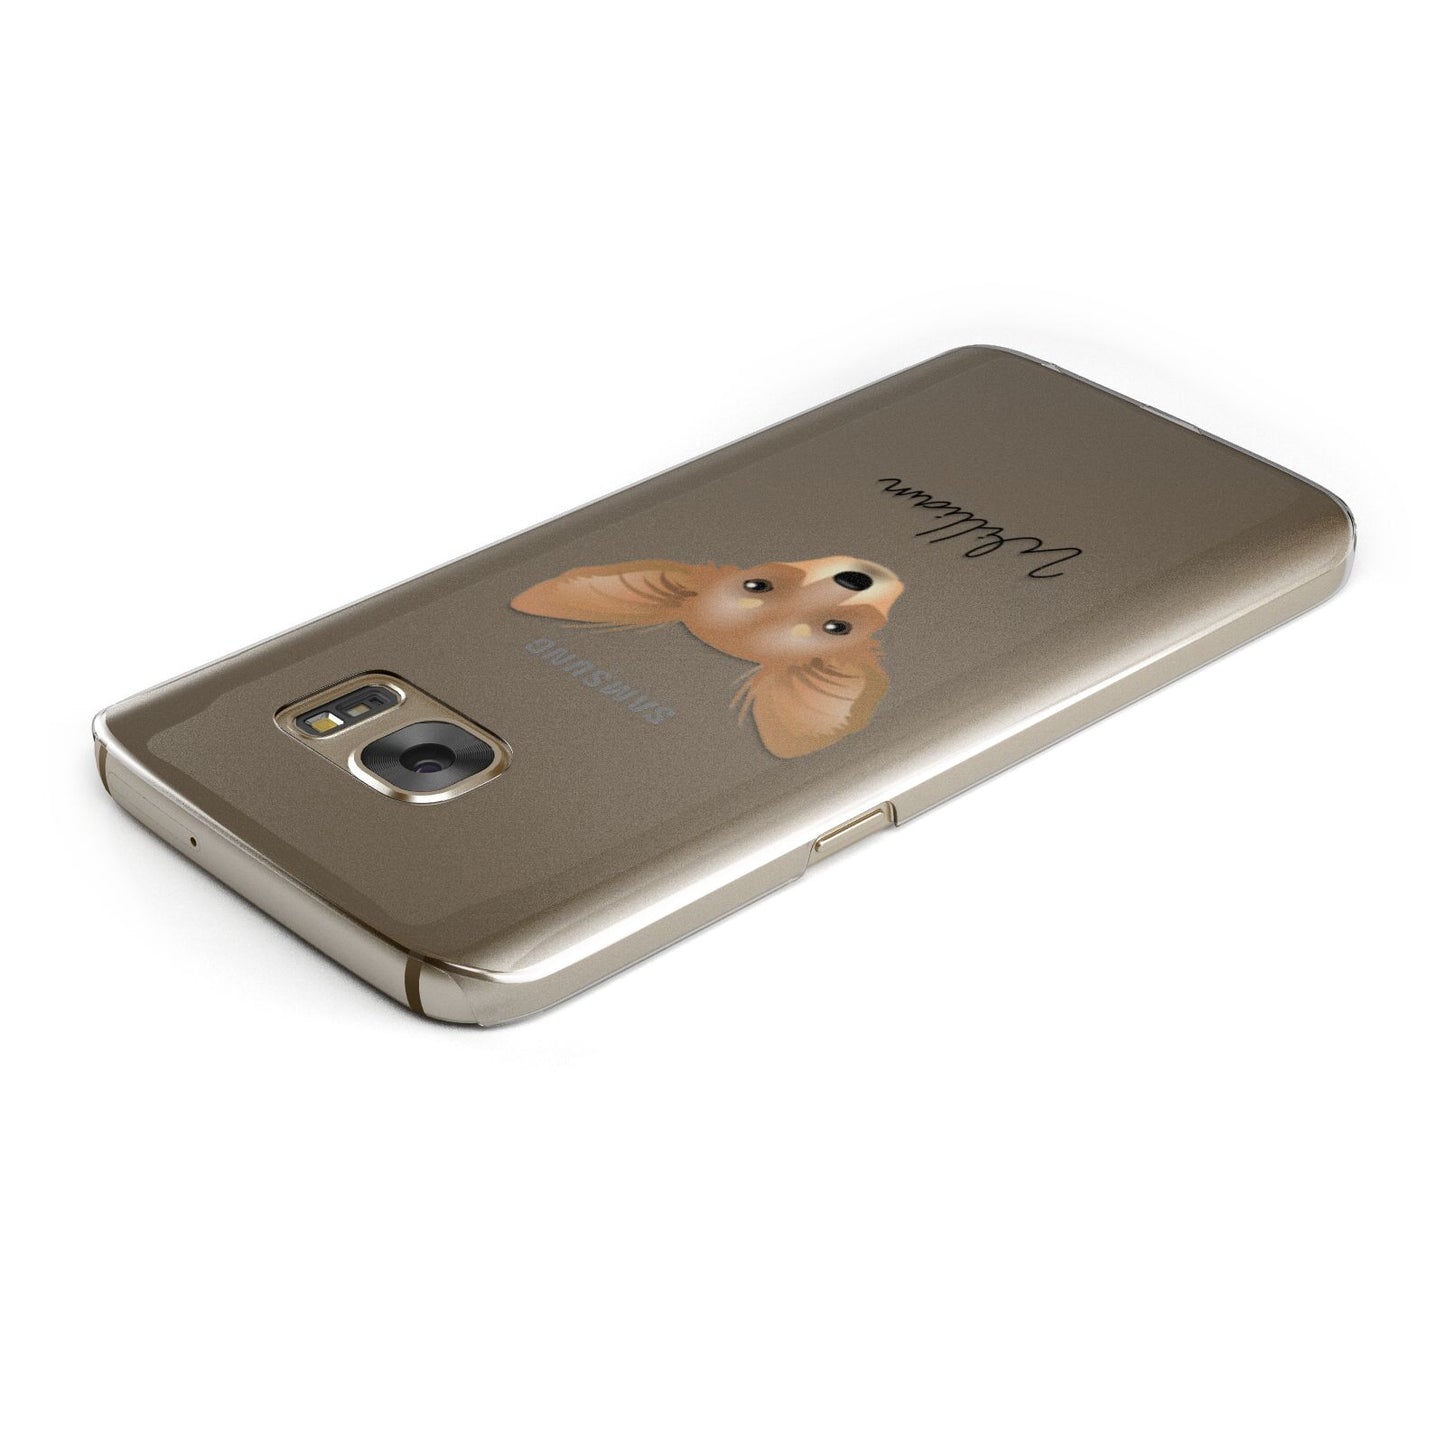 Russian Toy Personalised Samsung Galaxy Case Top Cutout